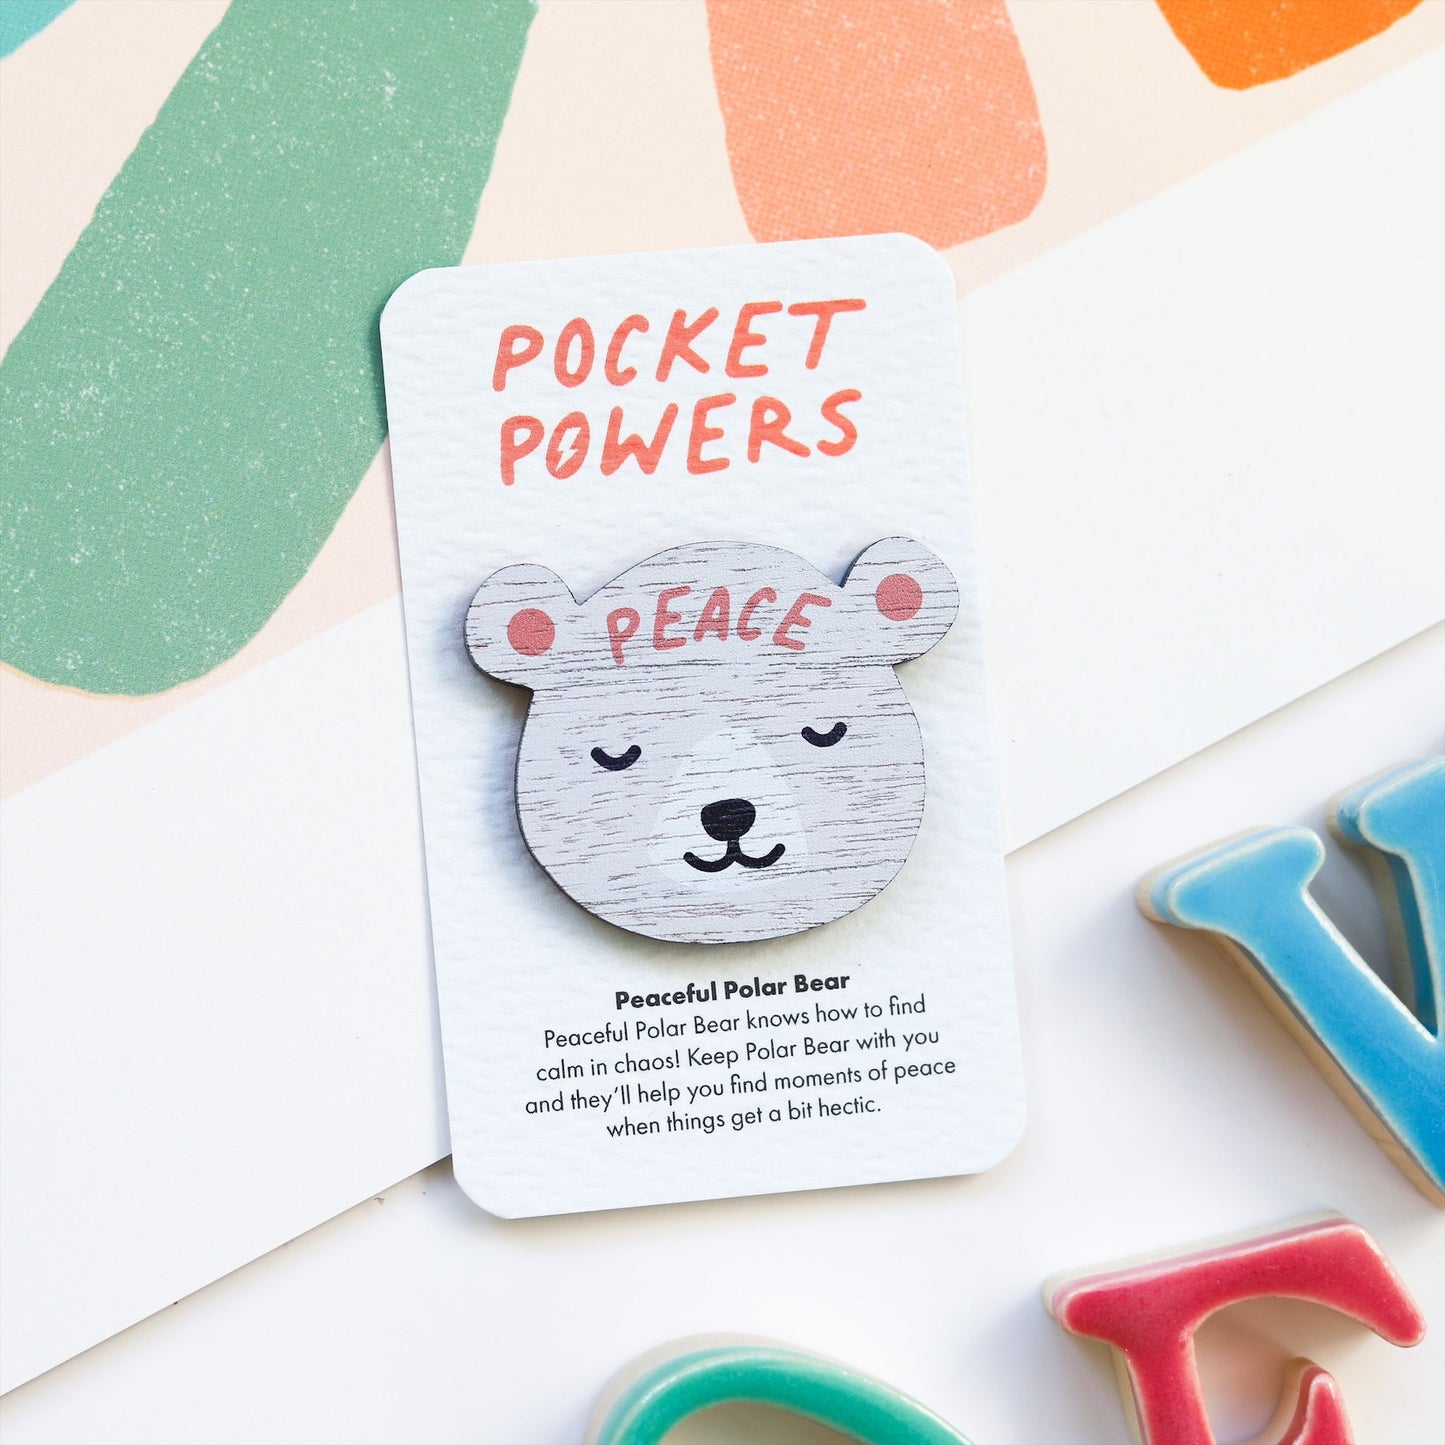 A wooden polar bear token, with the word 'peace' on their forehead. It is stuck to a card that says 'Pocket Powers - Peaceful Polar Bear knows how to find calm in chaos. Keep Polar Bear with you and they'll help you find moments of peace when things get a bit hectic.'